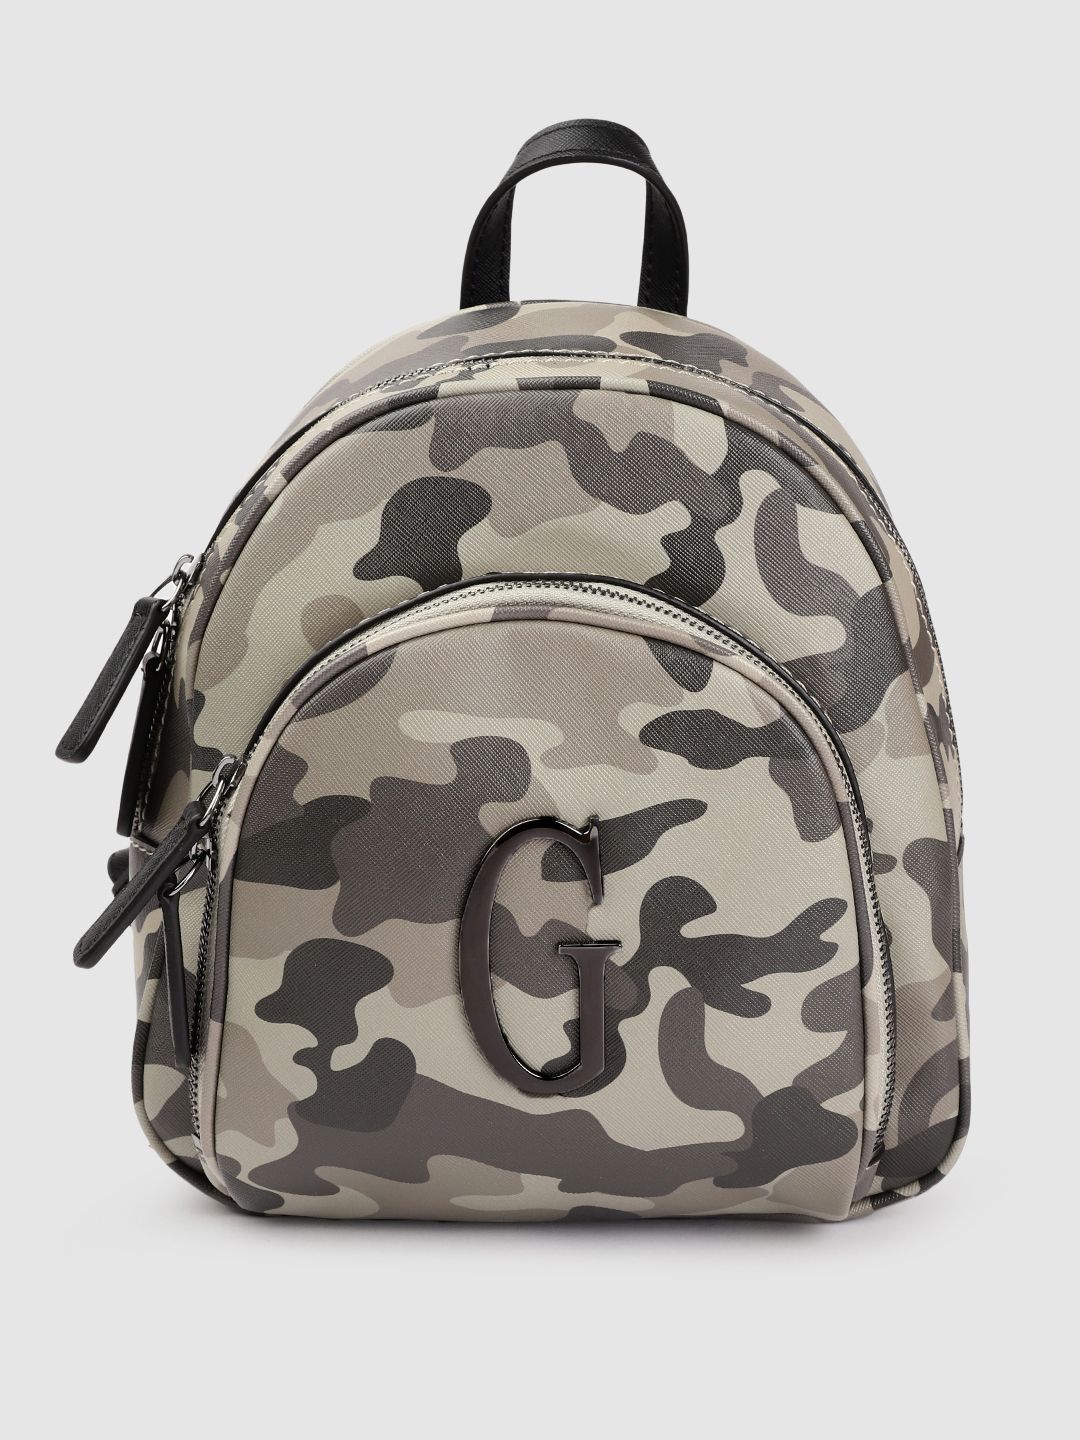 GUESS Women Green Camouflage Print Backpack Price in India